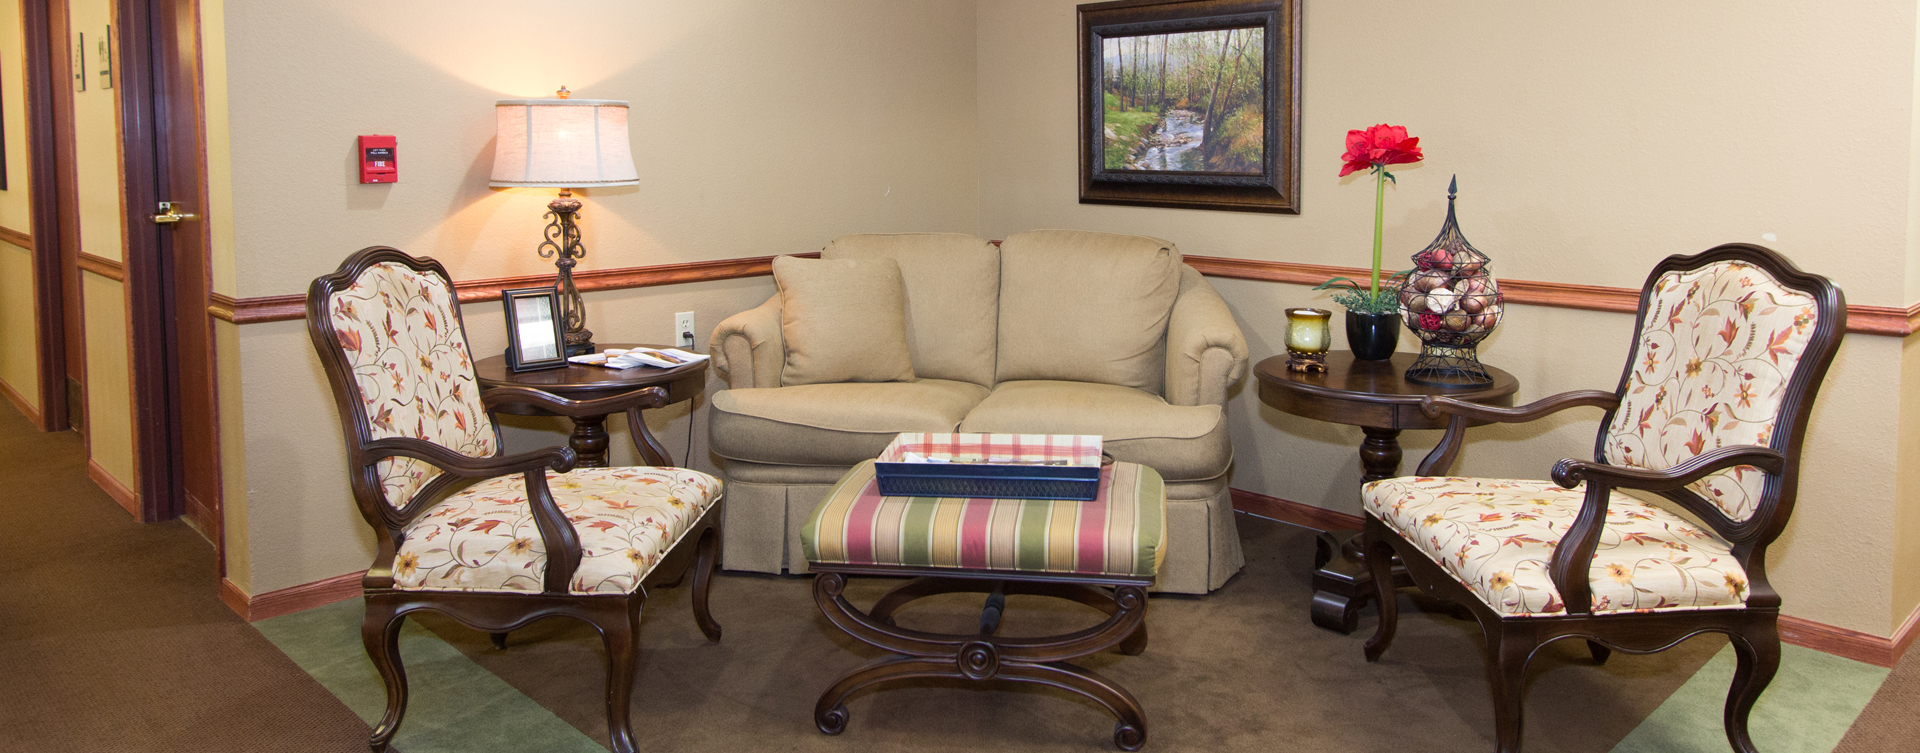 Enjoy a good book in the sitting area at Bickford of Bourbonnais